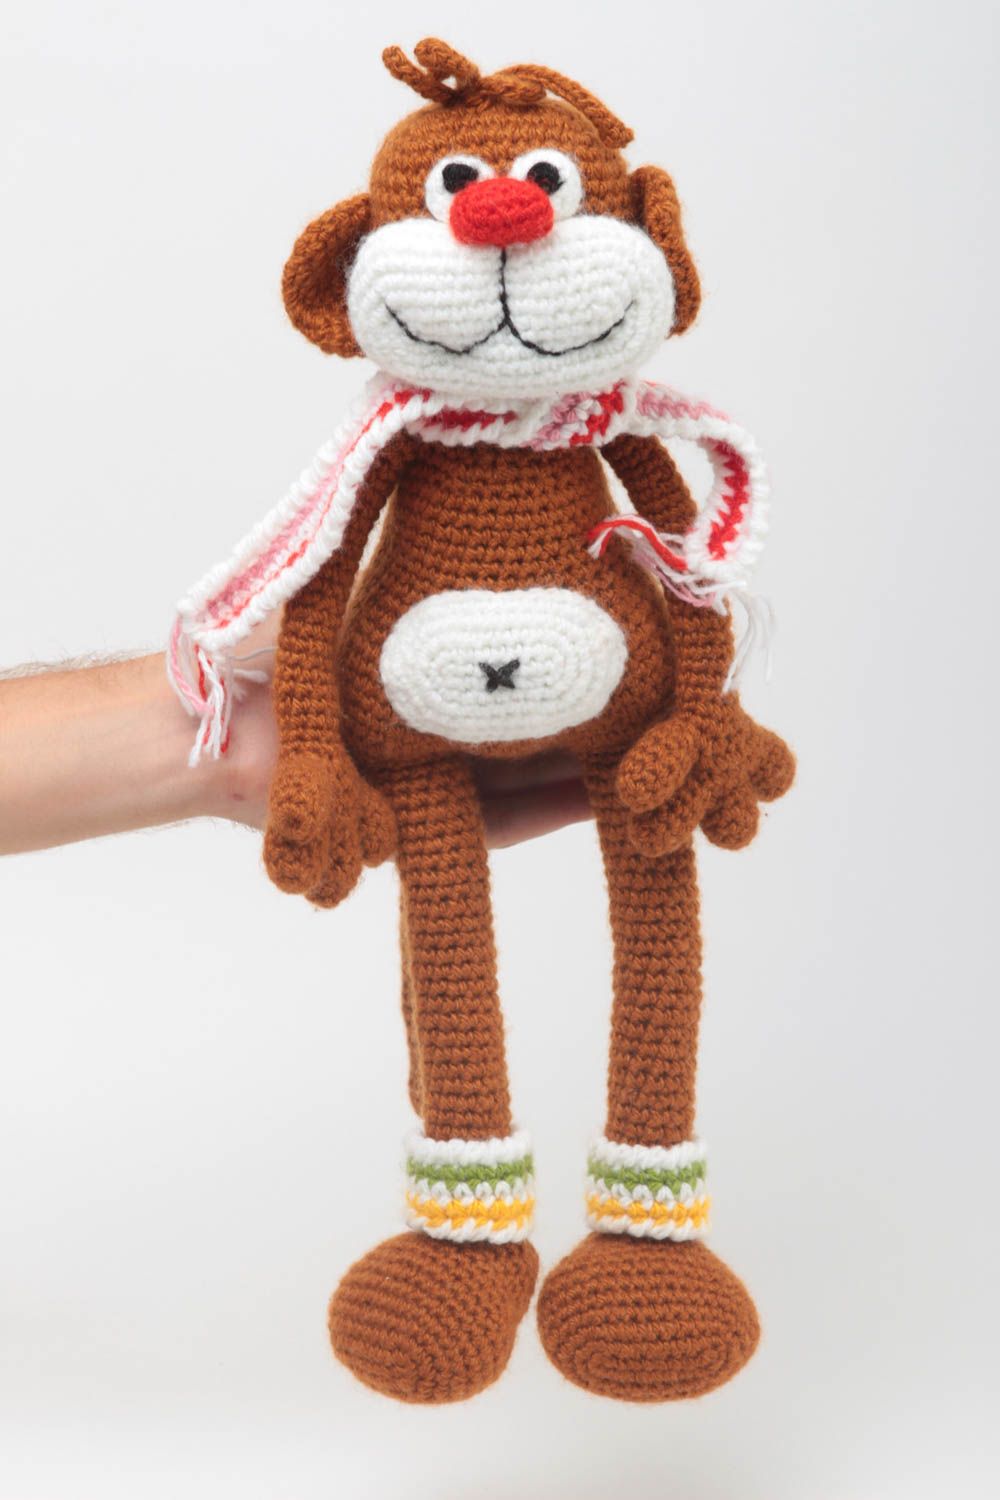 Beautiful handmade soft toy stuffed crochet toy best toys for kids gift ideas photo 5